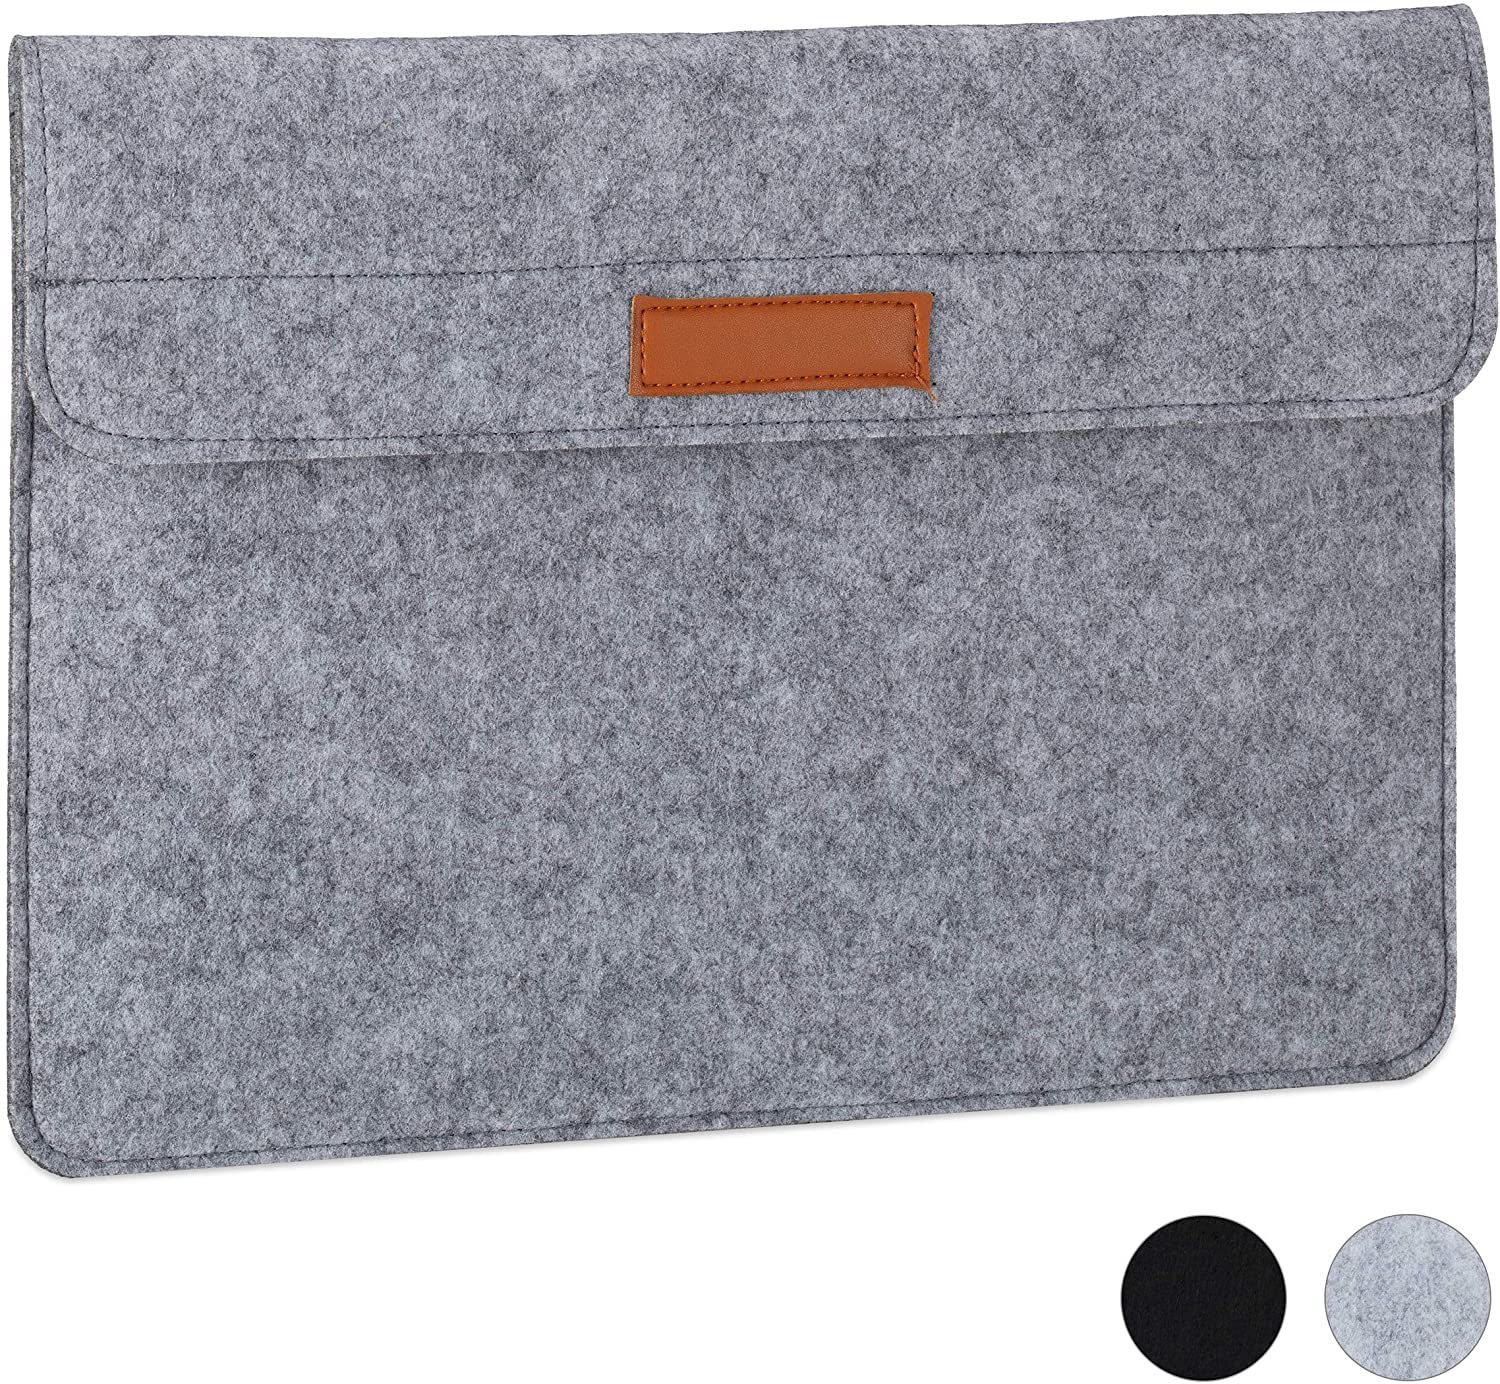 Relaxdays Laptop Sleeve 15.4 Inches Felt Protective Laptop And Notebook 4 C